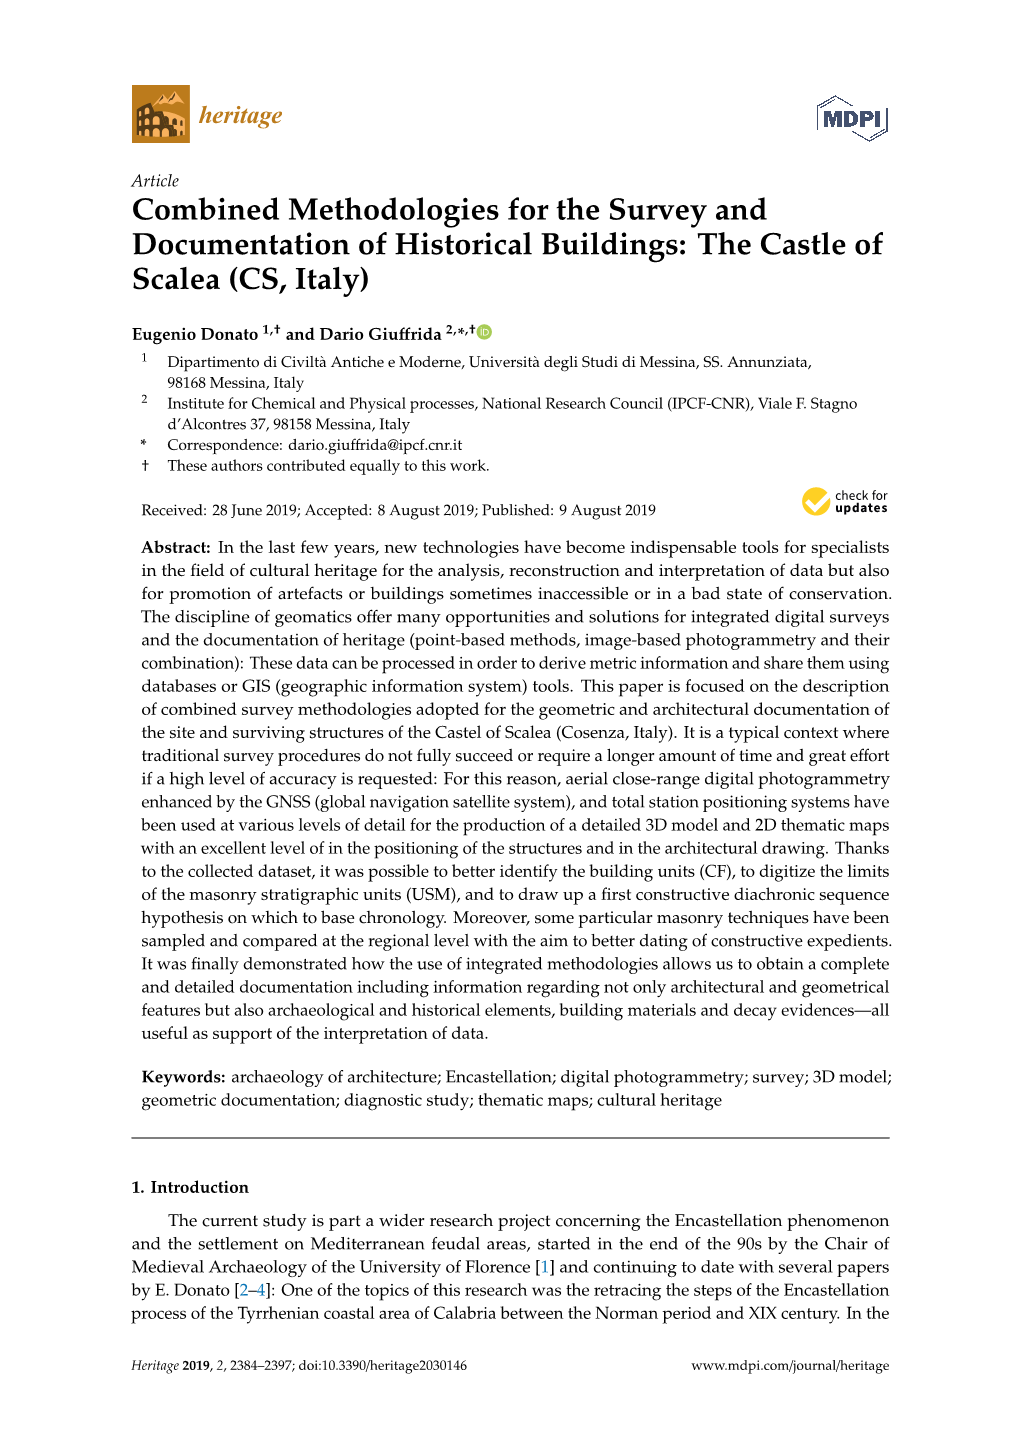 Combined Methodologies for the Survey and Documentation of Historical Buildings: the Castle of Scalea (CS, Italy)